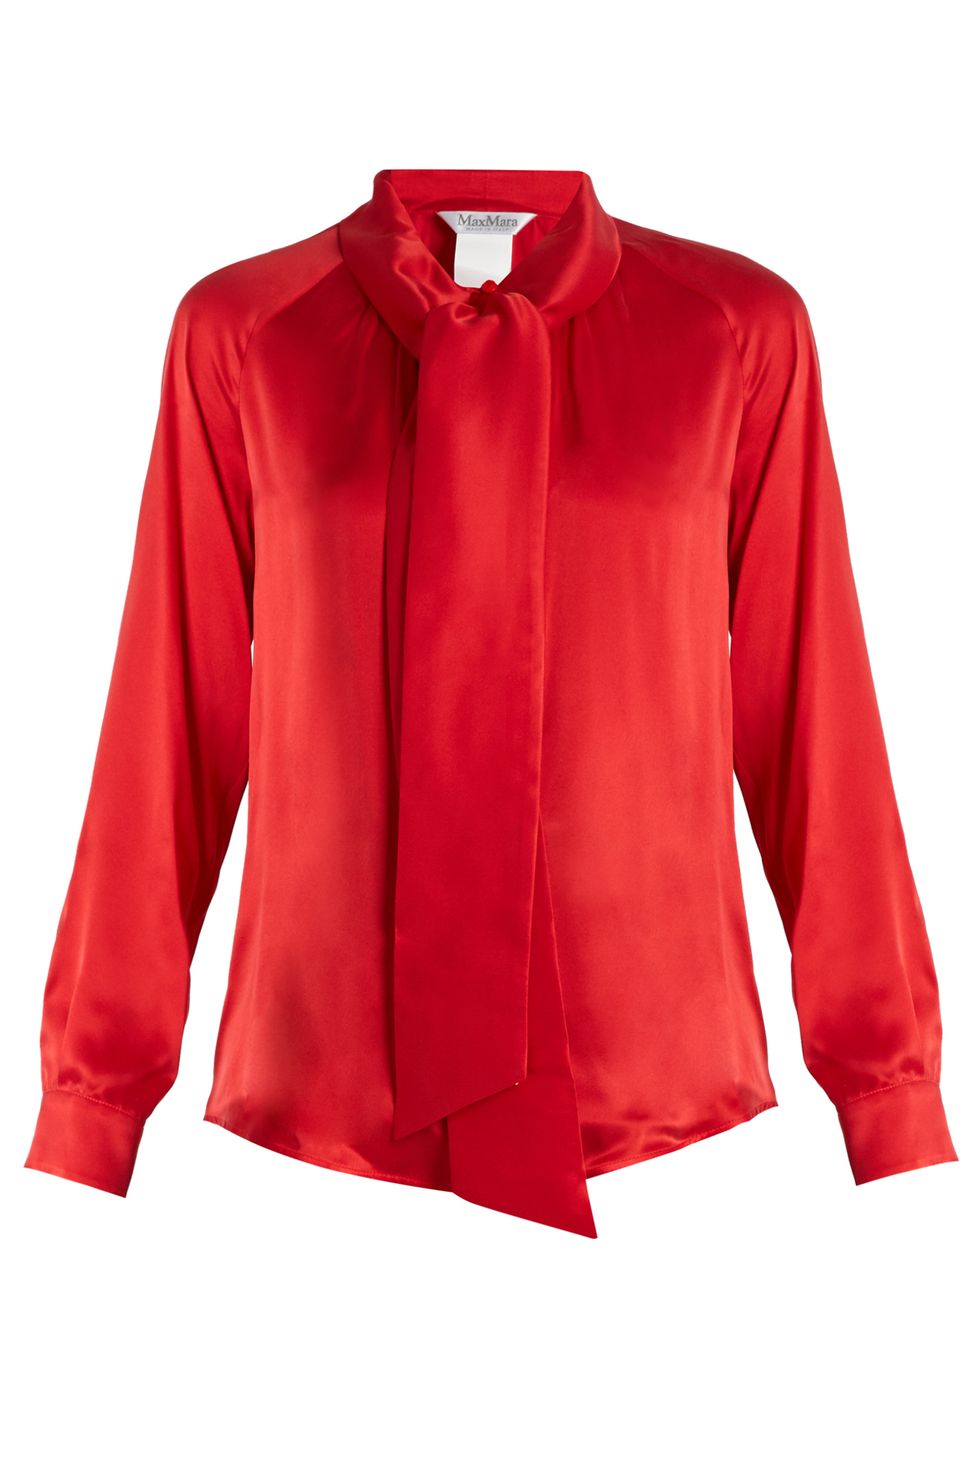 ruffled blouses, romantic blouses, pink blouses, red blouses, shirts, tops